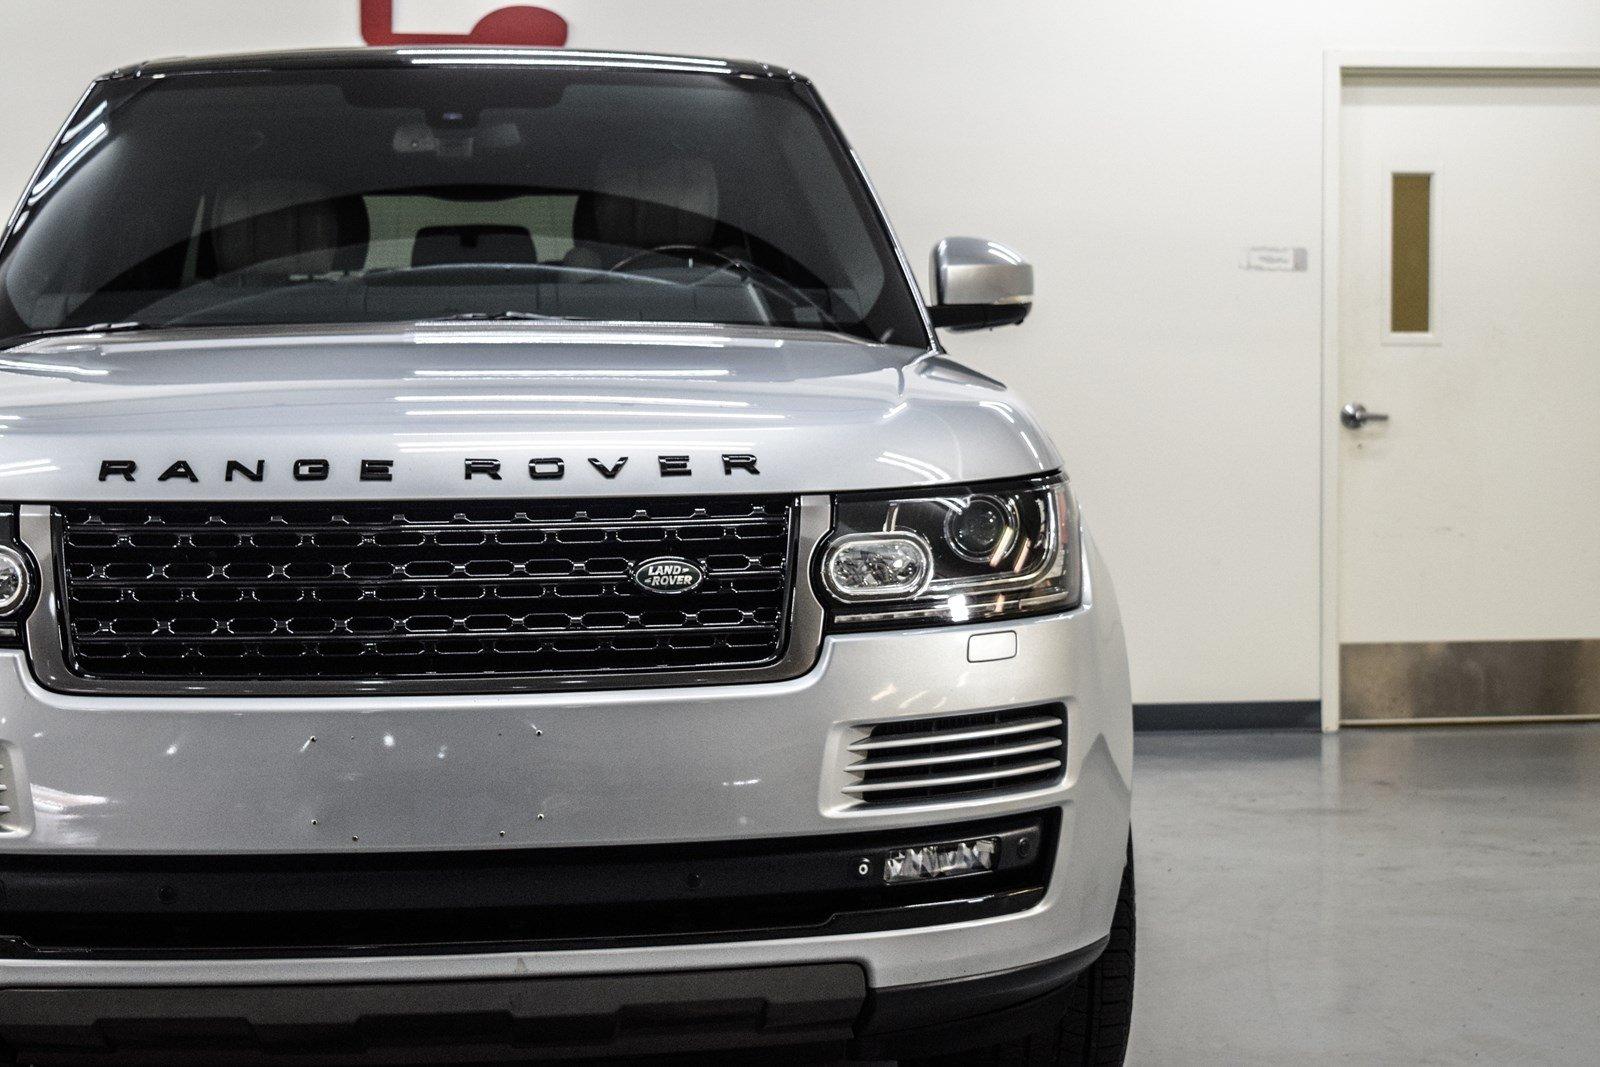 Used 2014 Land Rover Range Rover Supercharged for sale Sold at Gravity Autos Marietta in Marietta GA 30060 5